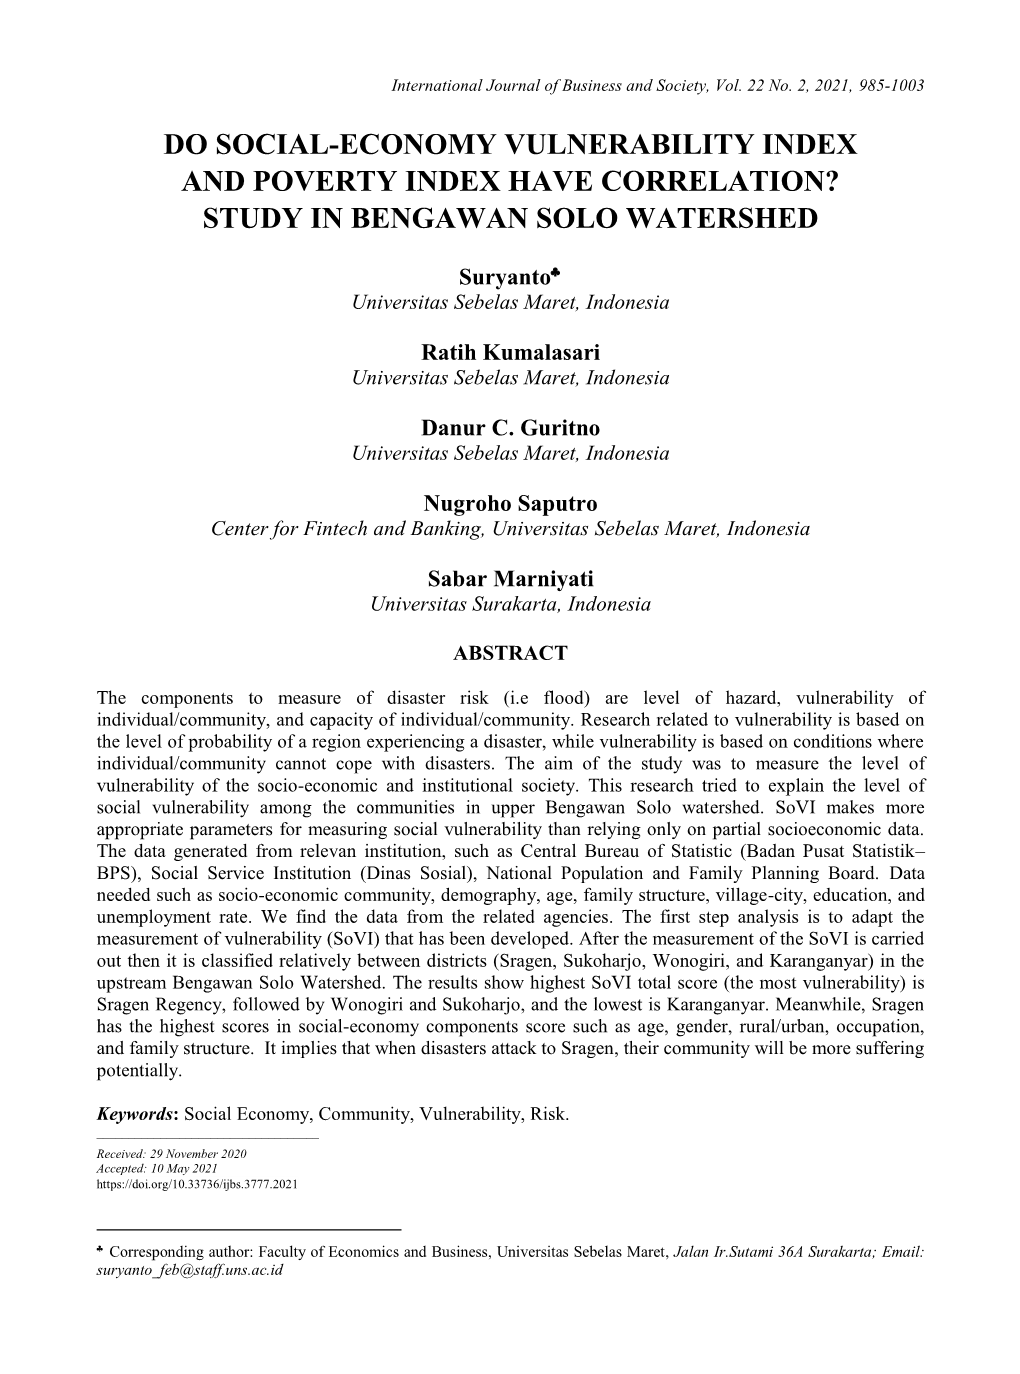 Do Social-Economy Vulnerability Index and Poverty Index Have Correlation? Study in Bengawan Solo Watershed